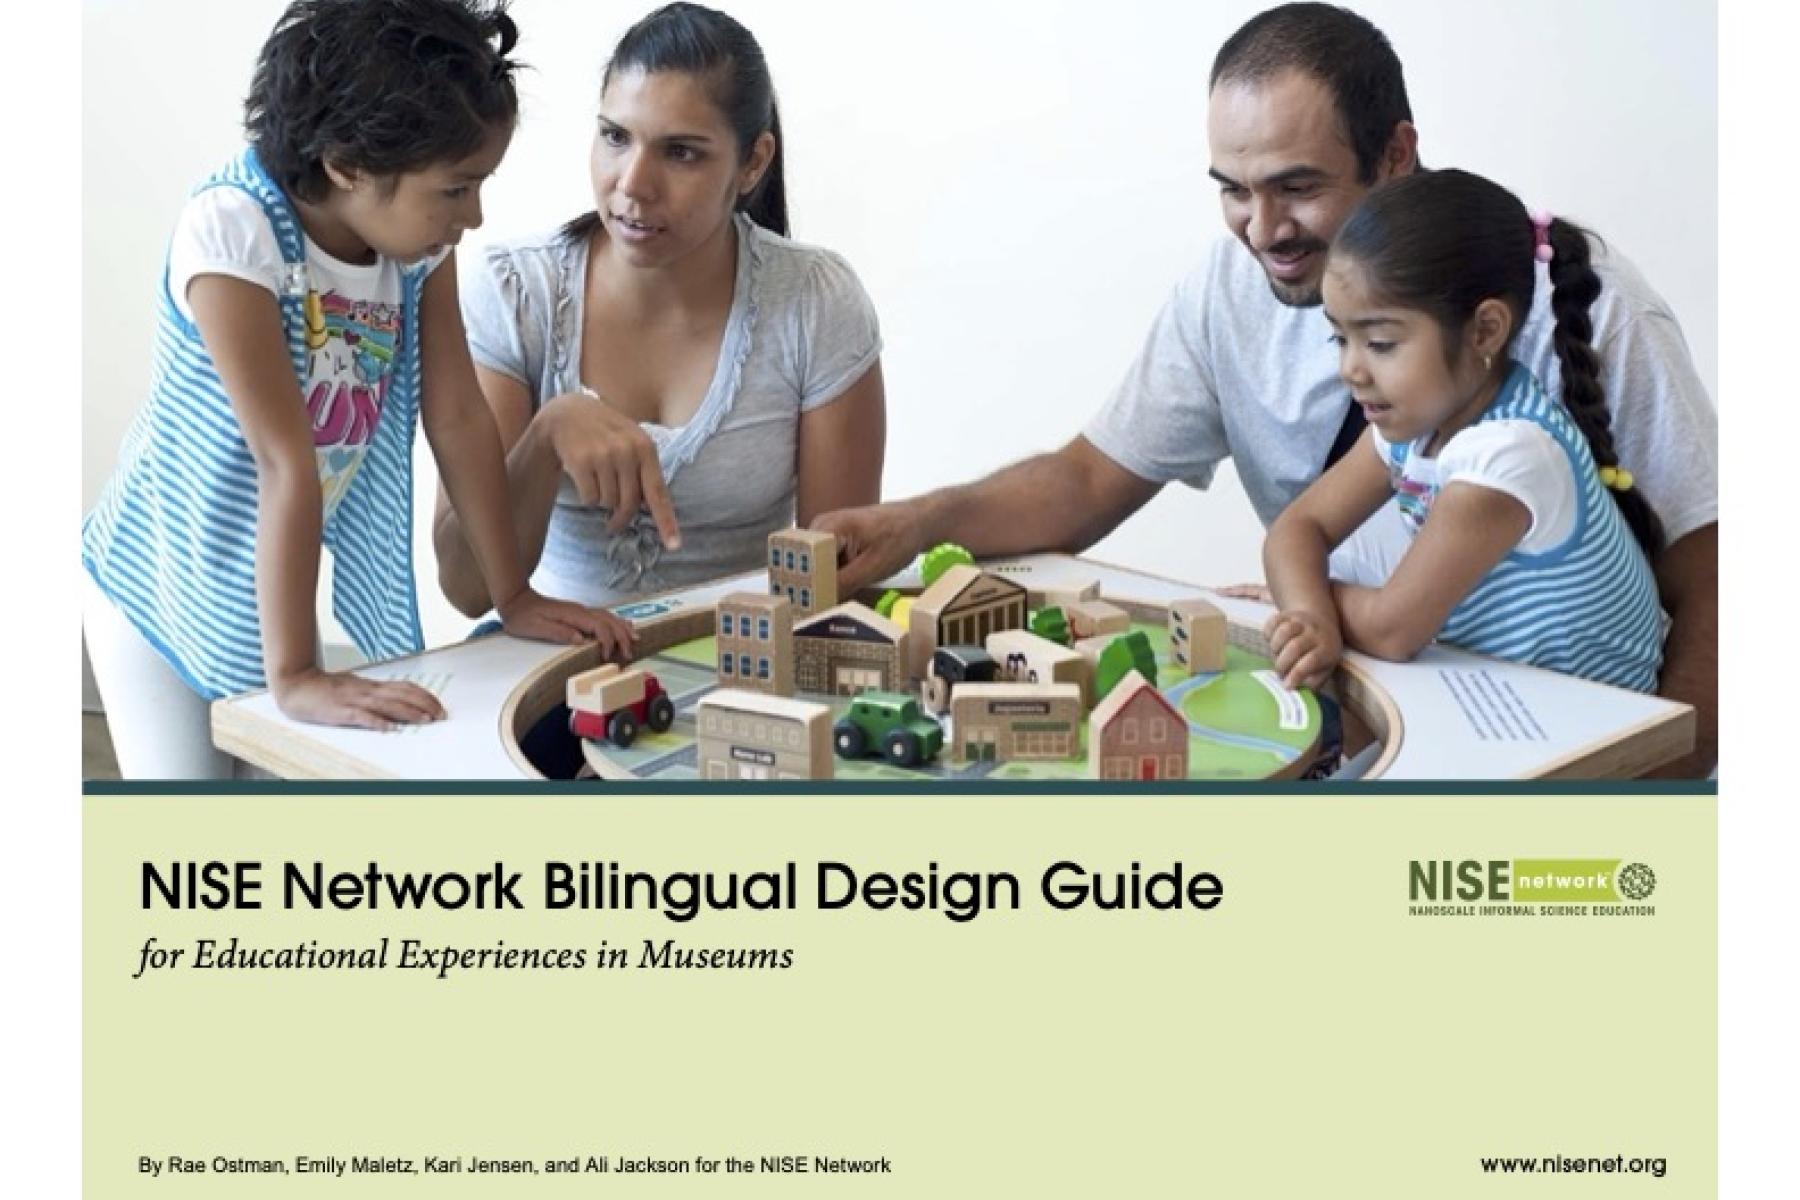 Bilingual Design Guide cover showing Latino family having conversation about an exhibit